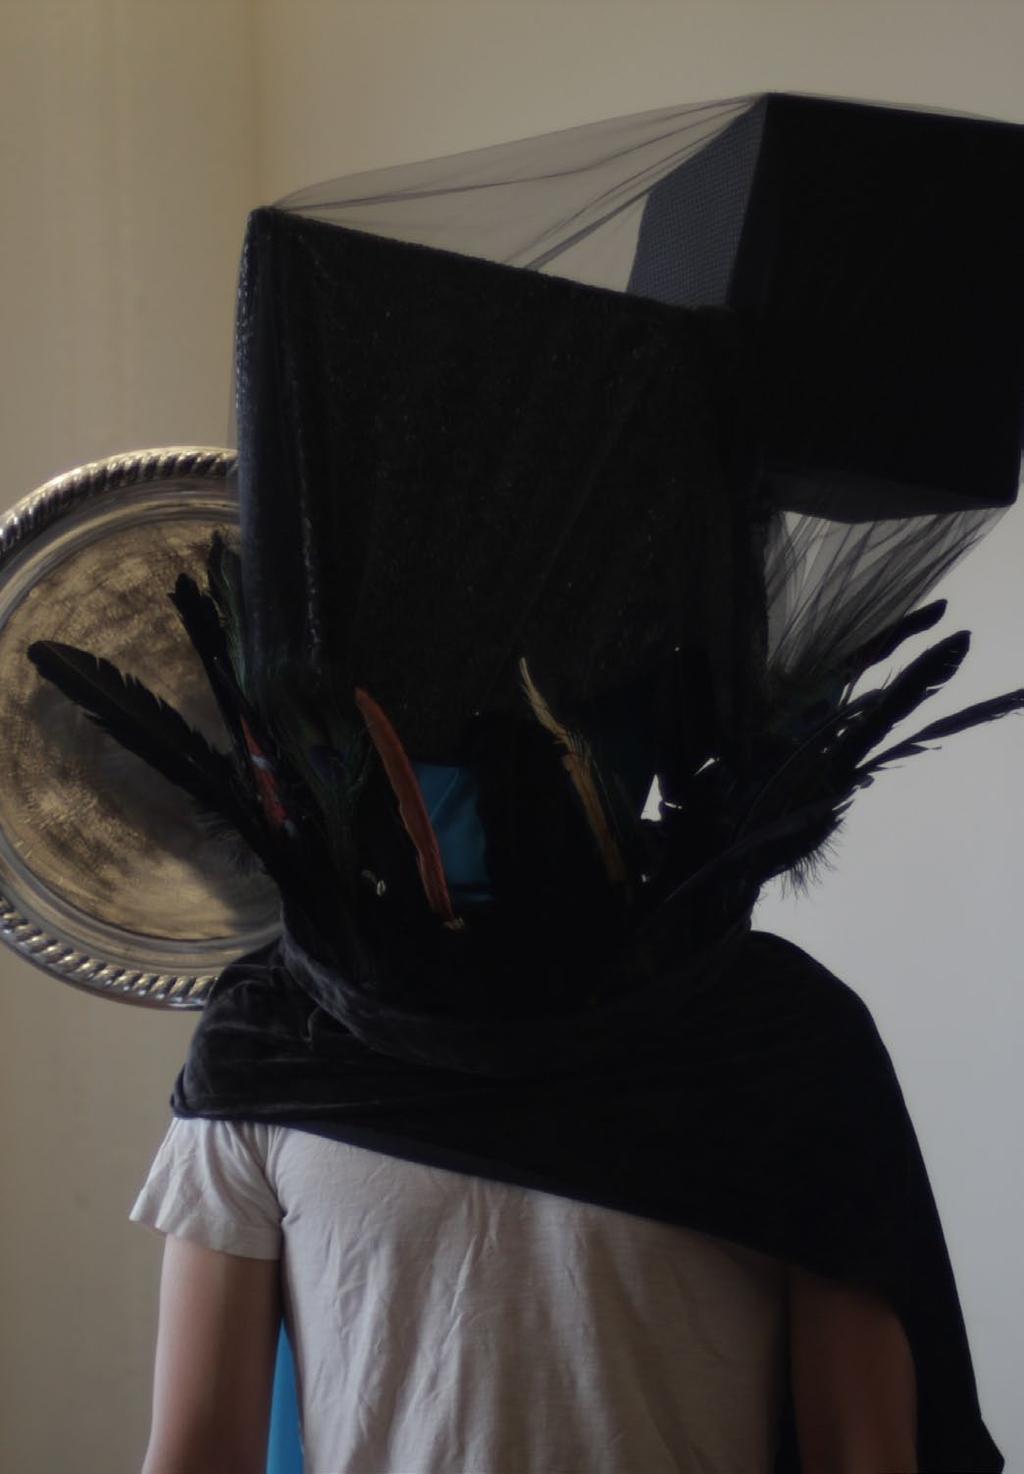 The crazy headdress is formed by a couple of skewed cube shapes on top of each other.